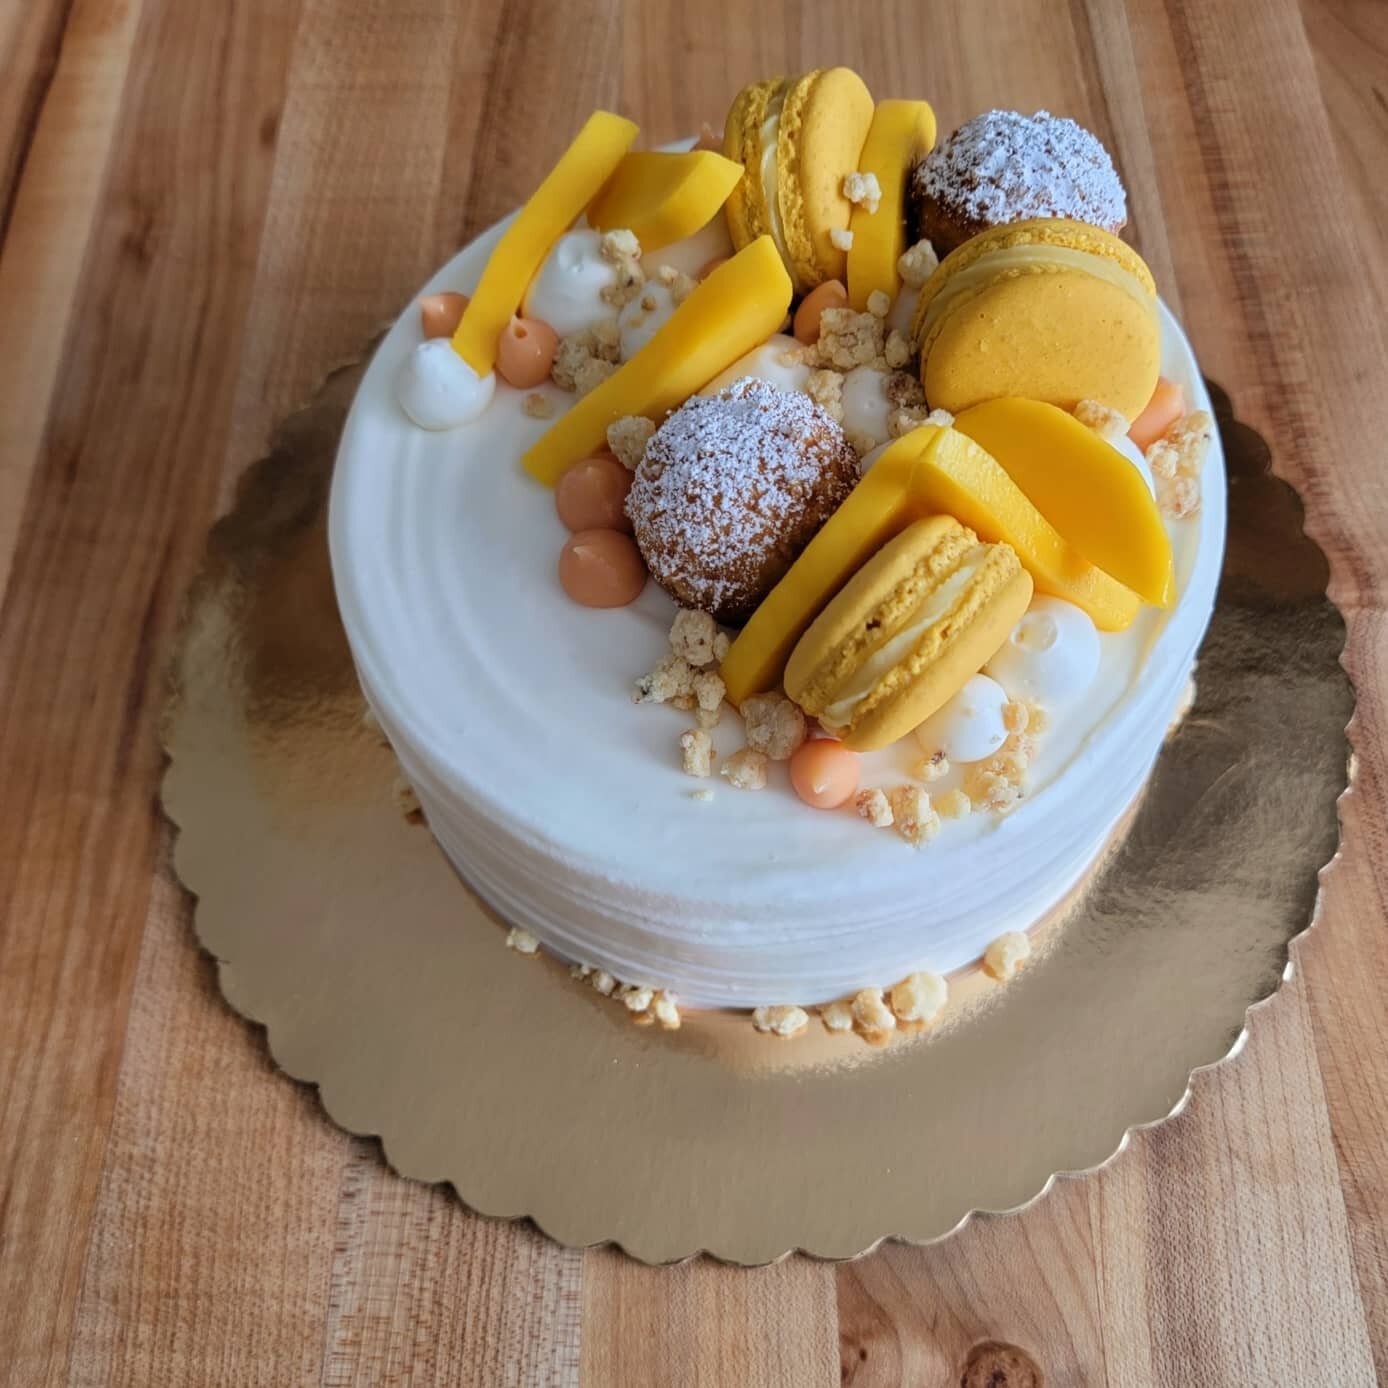 Happy dad's day to all the dads out there, past, present, and expecting! 🥰

We got a roll cake box special for next Saturday 6/26! 😁 it's available up on our website!

🎂: coconut sponge, guava lemonade cream center, topped with vanilla puffs, pass